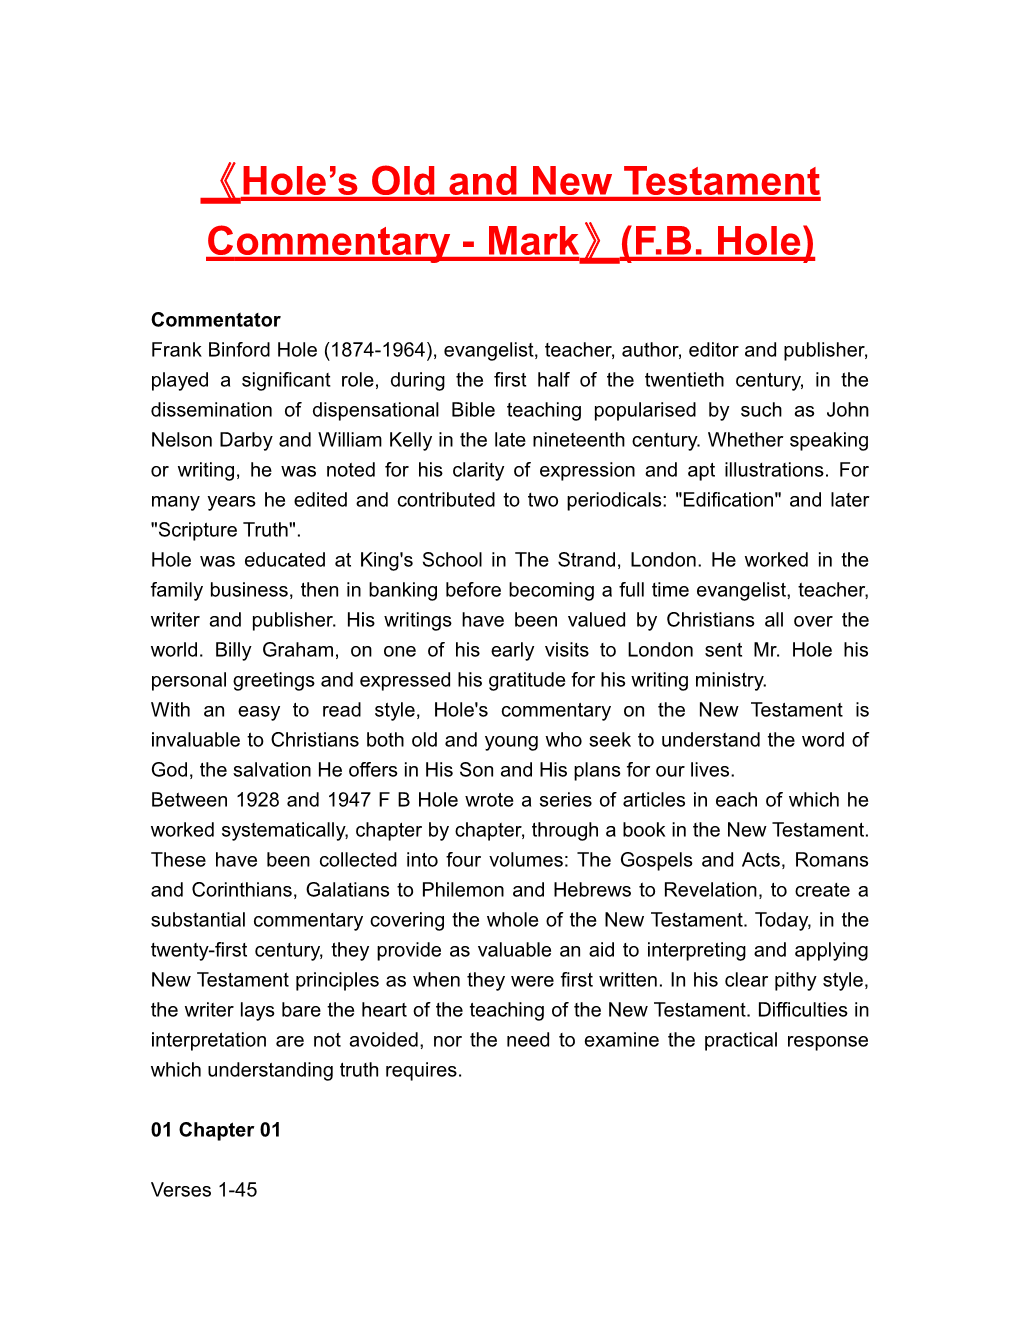 Hole S Old and New Testament Commentary - Mark (F.B. Hole)